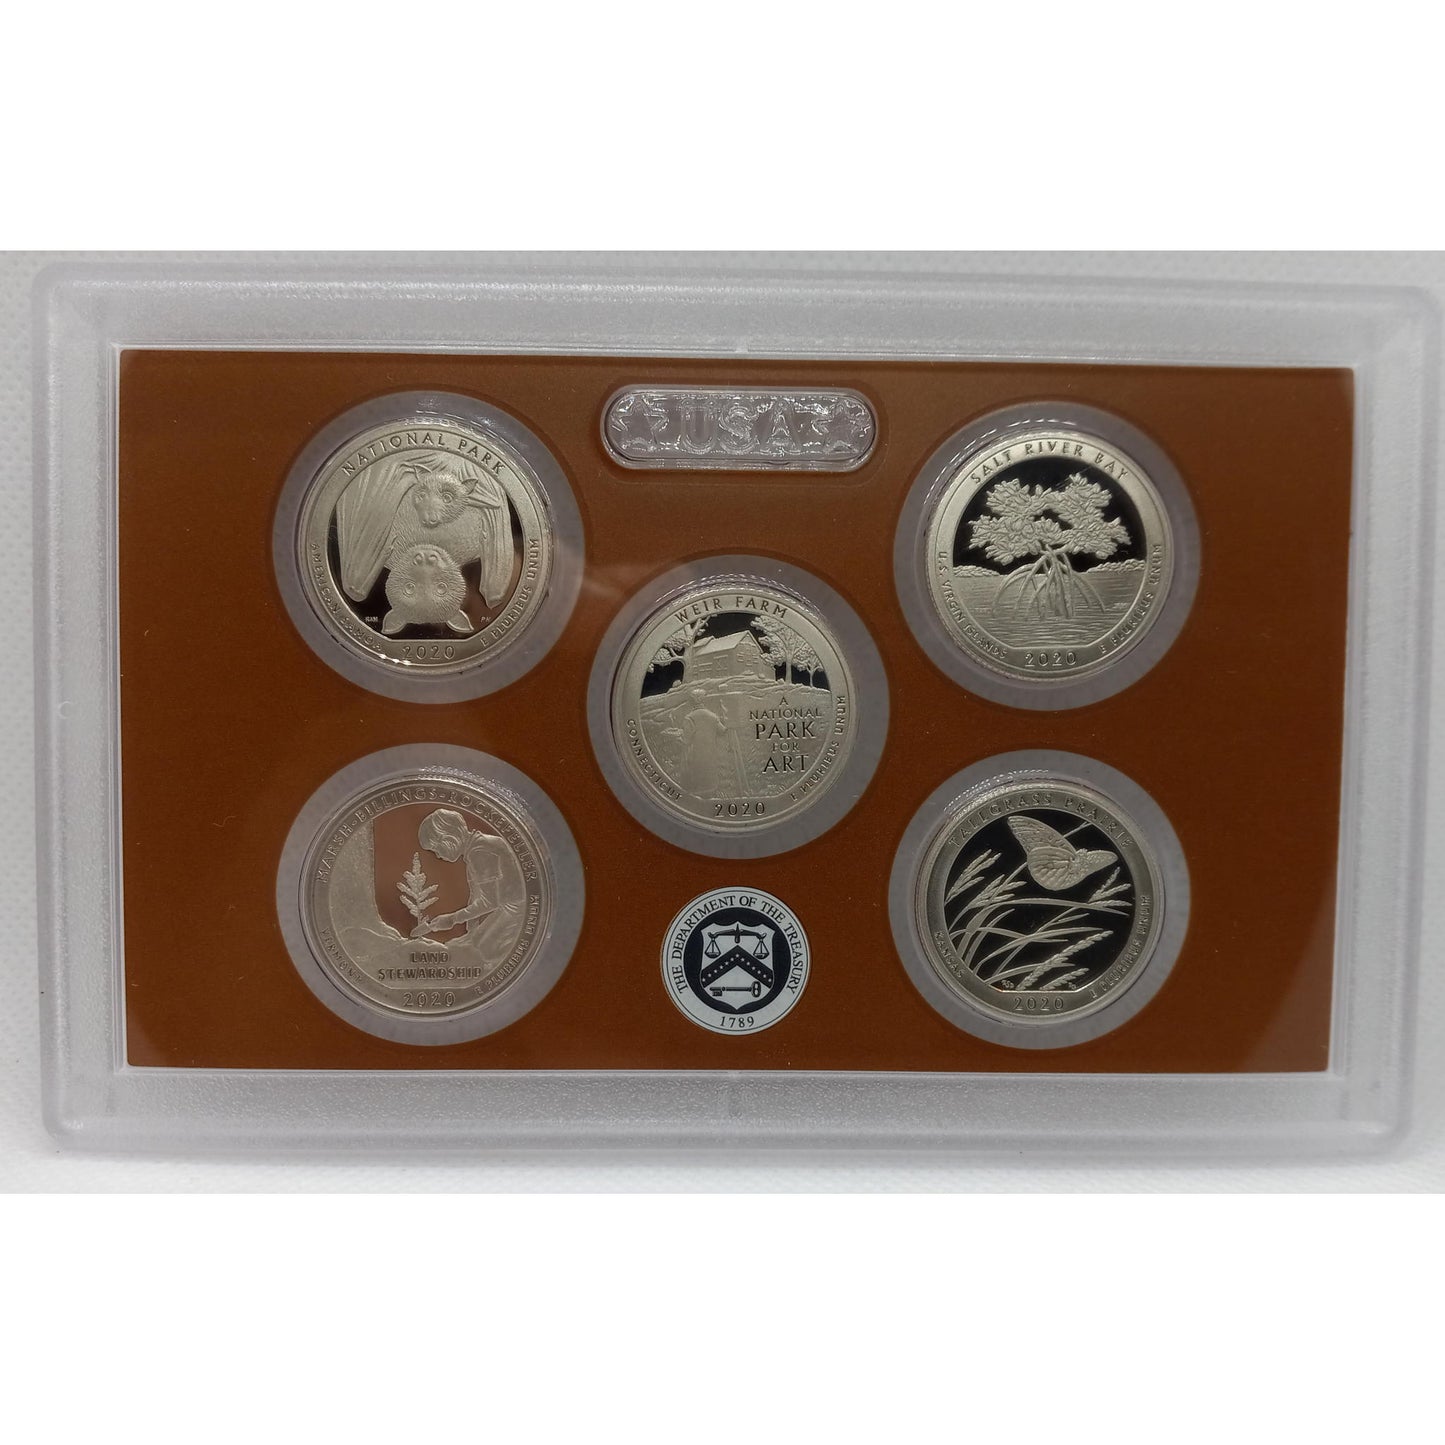 2020 United States Mint PROOF SET ( CLAD ) with PROOF W NICKEL - OGP & COA!